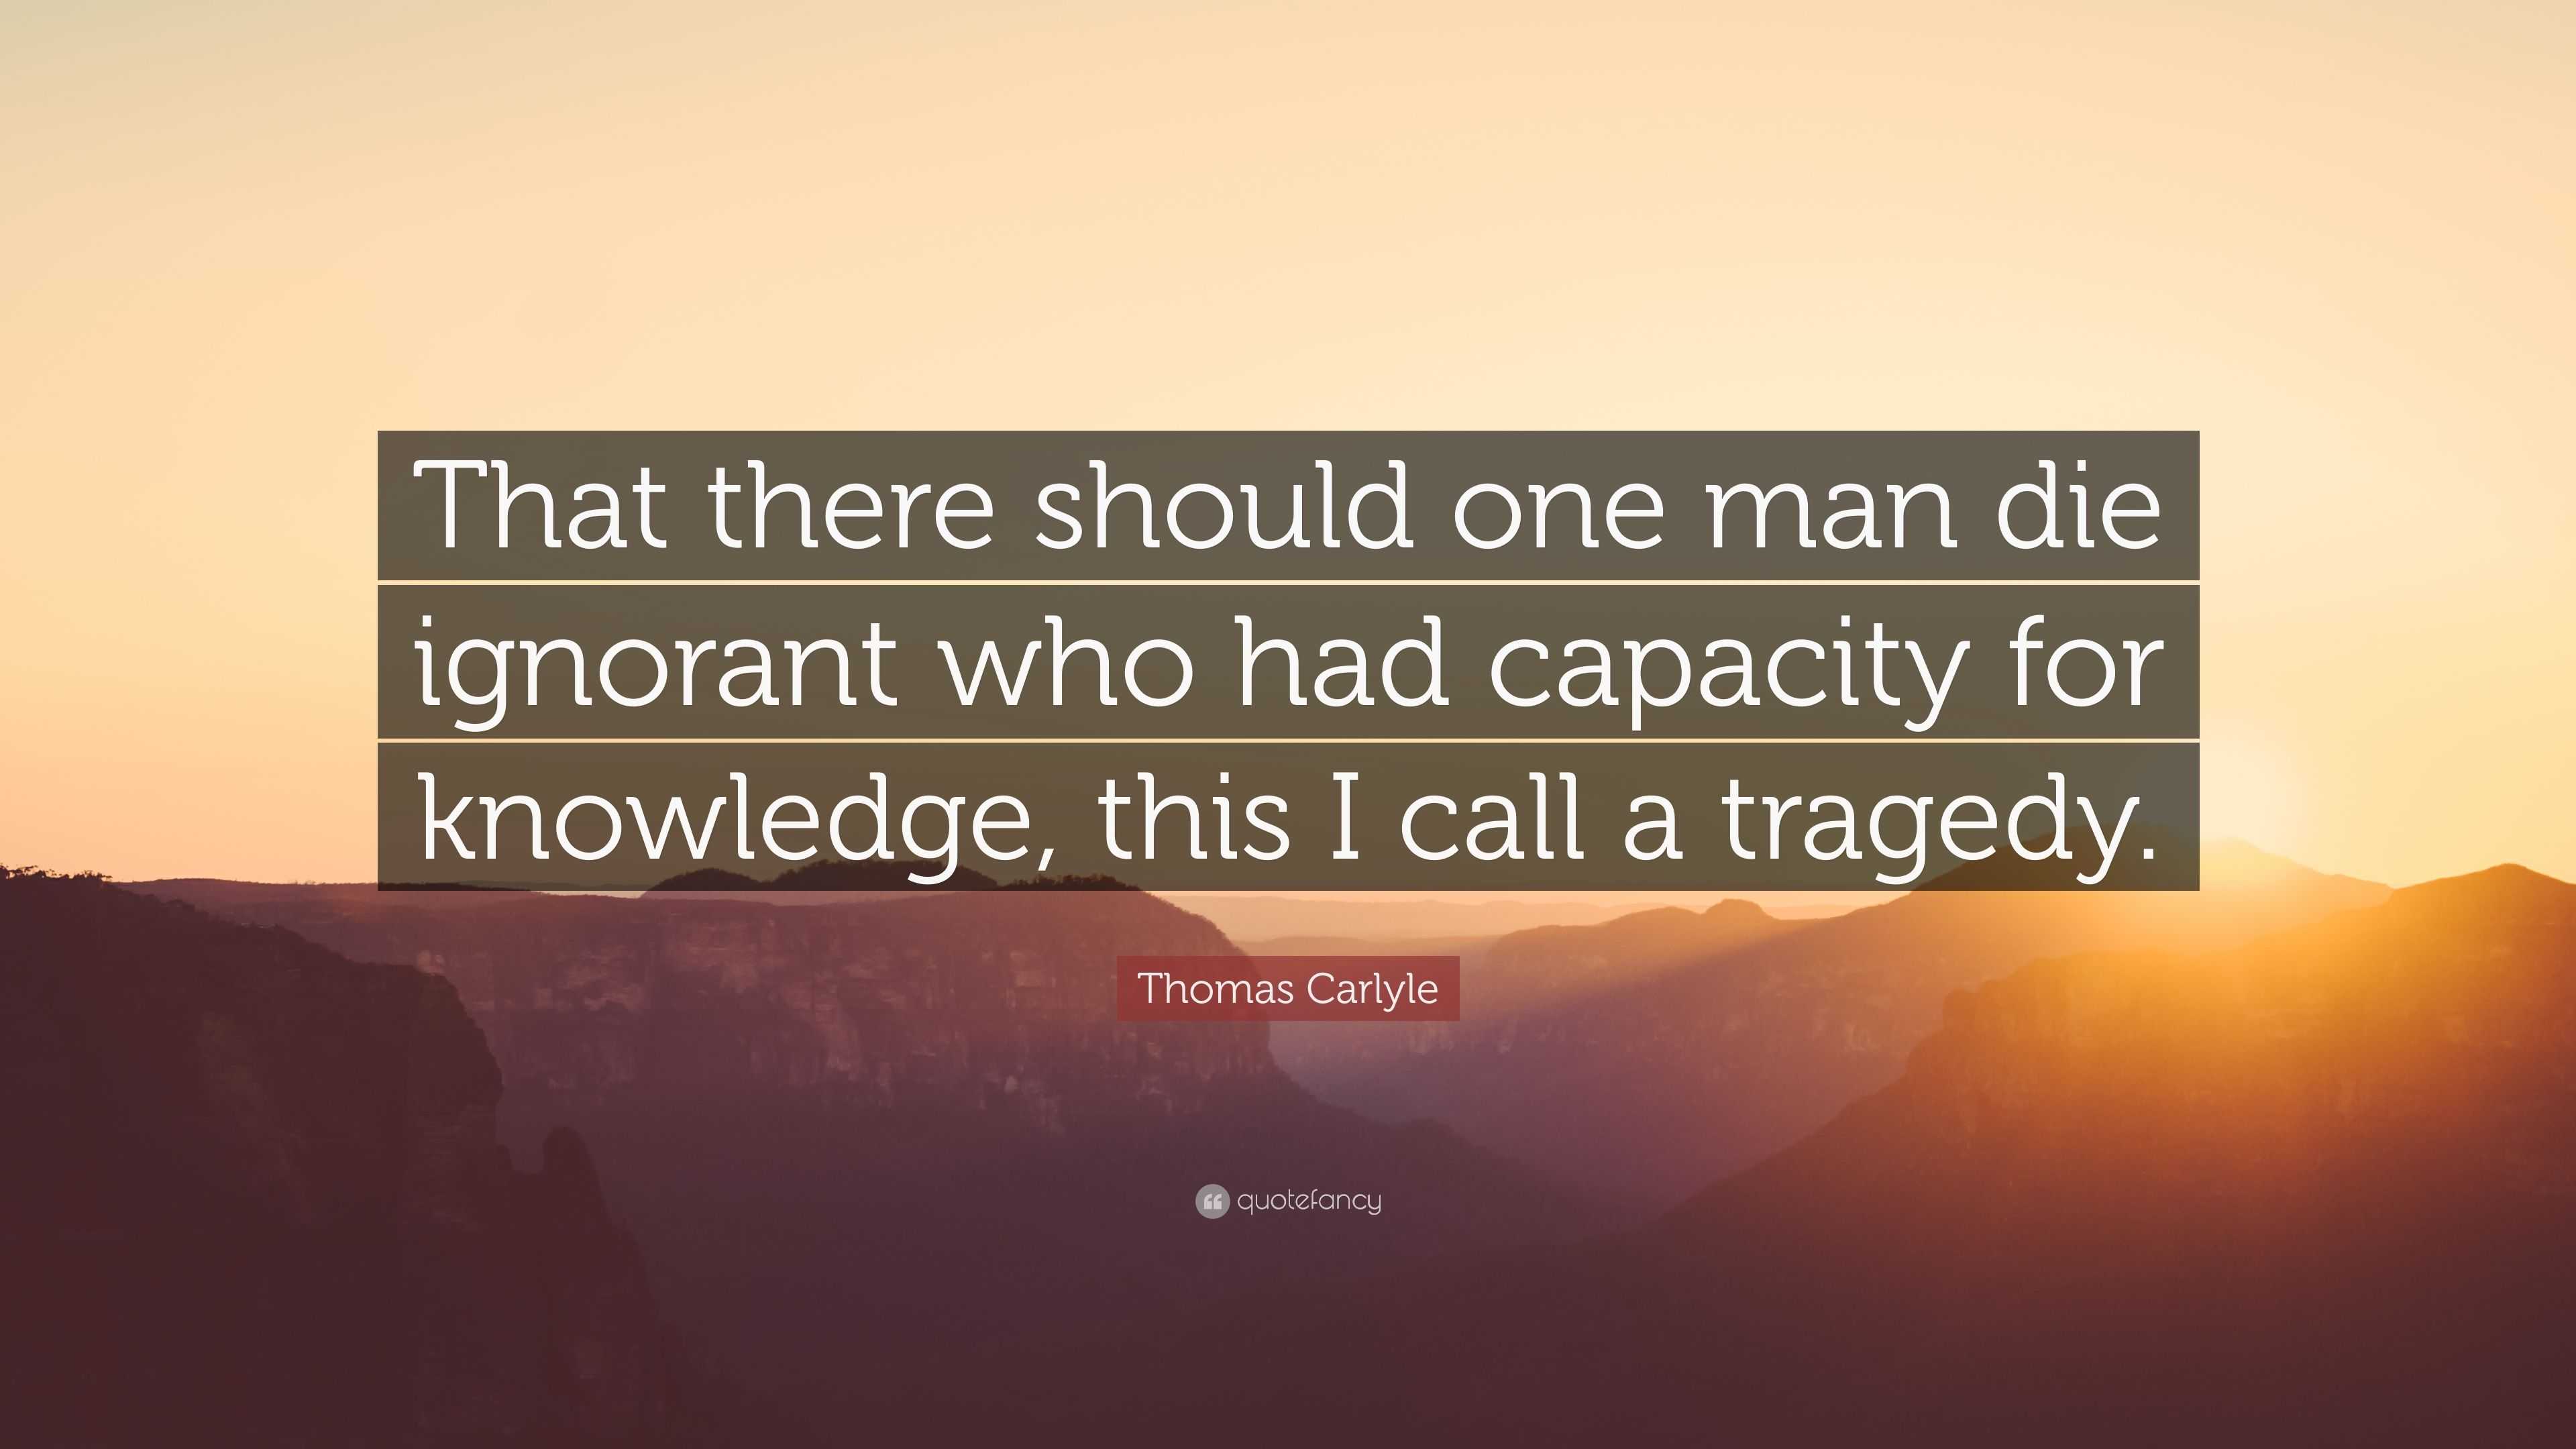 Thomas Carlyle Quote “that There Should One Man Die Ignorant Who Had